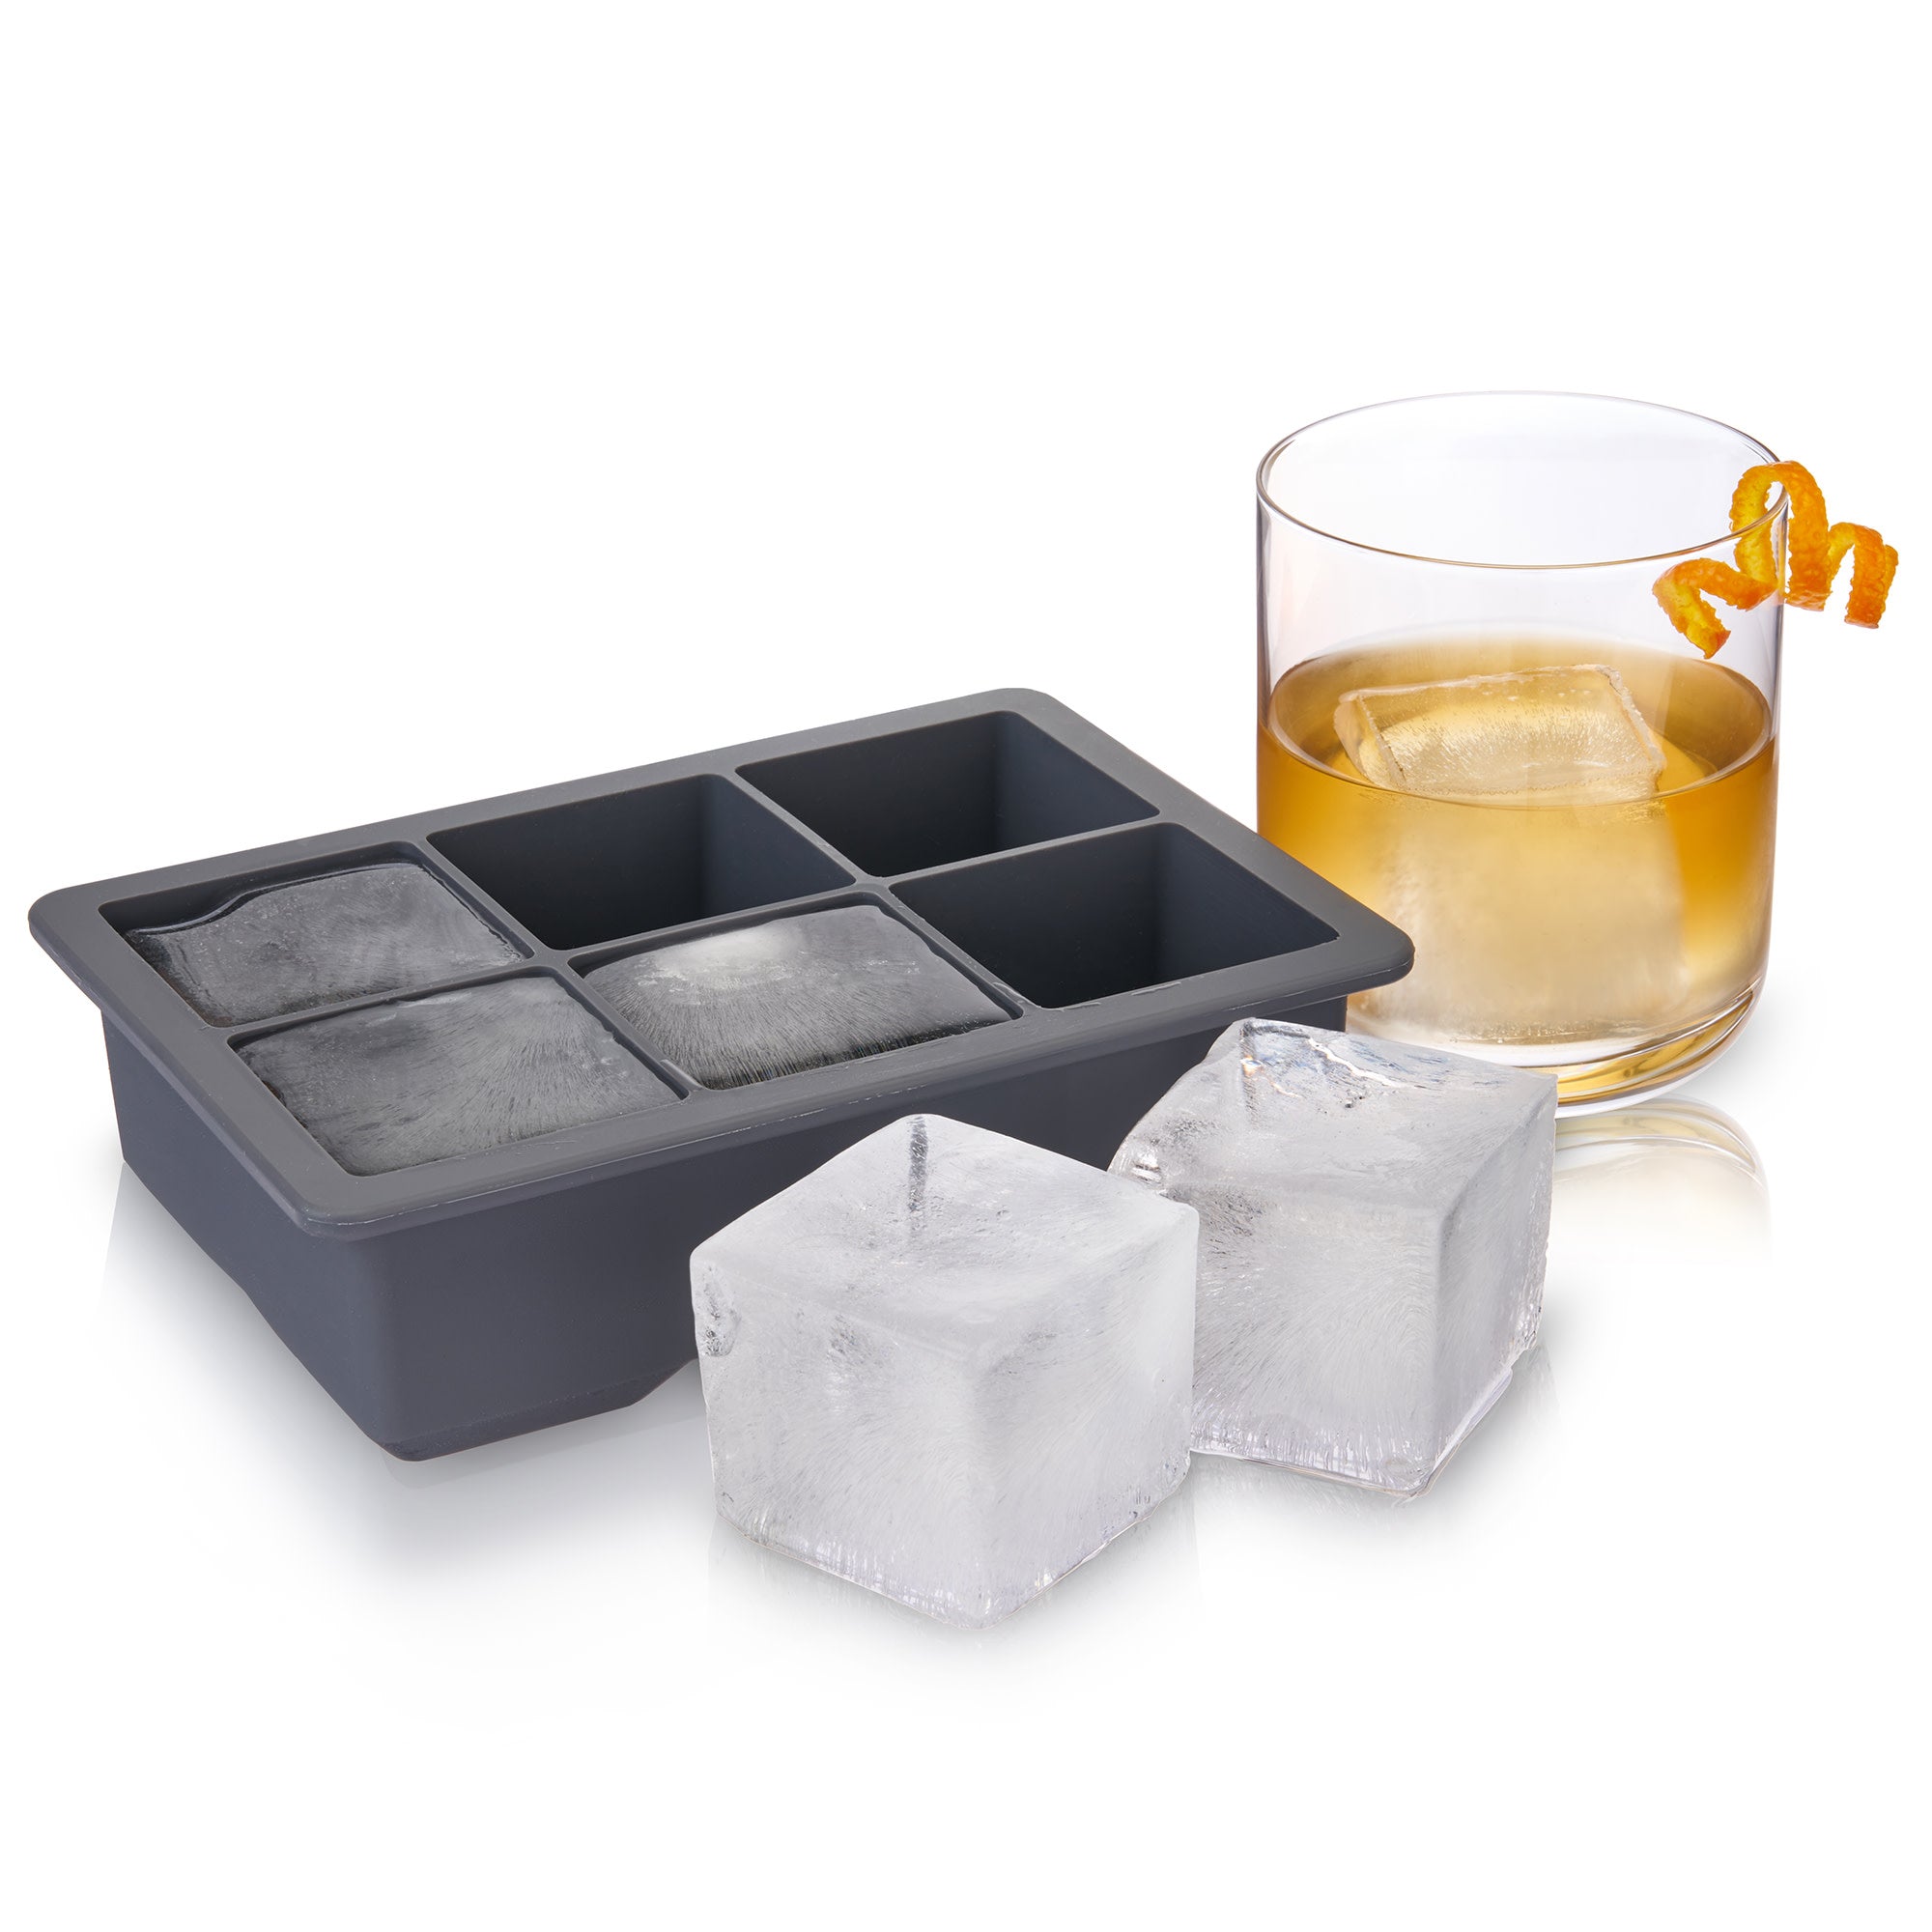 24 Grid Large Ice Cube Trays Mold for Freezer Easy Release Tray Mold 24  Cavity Square Ice Cube Tray for Cocktails Whiskey Soups - AliExpress